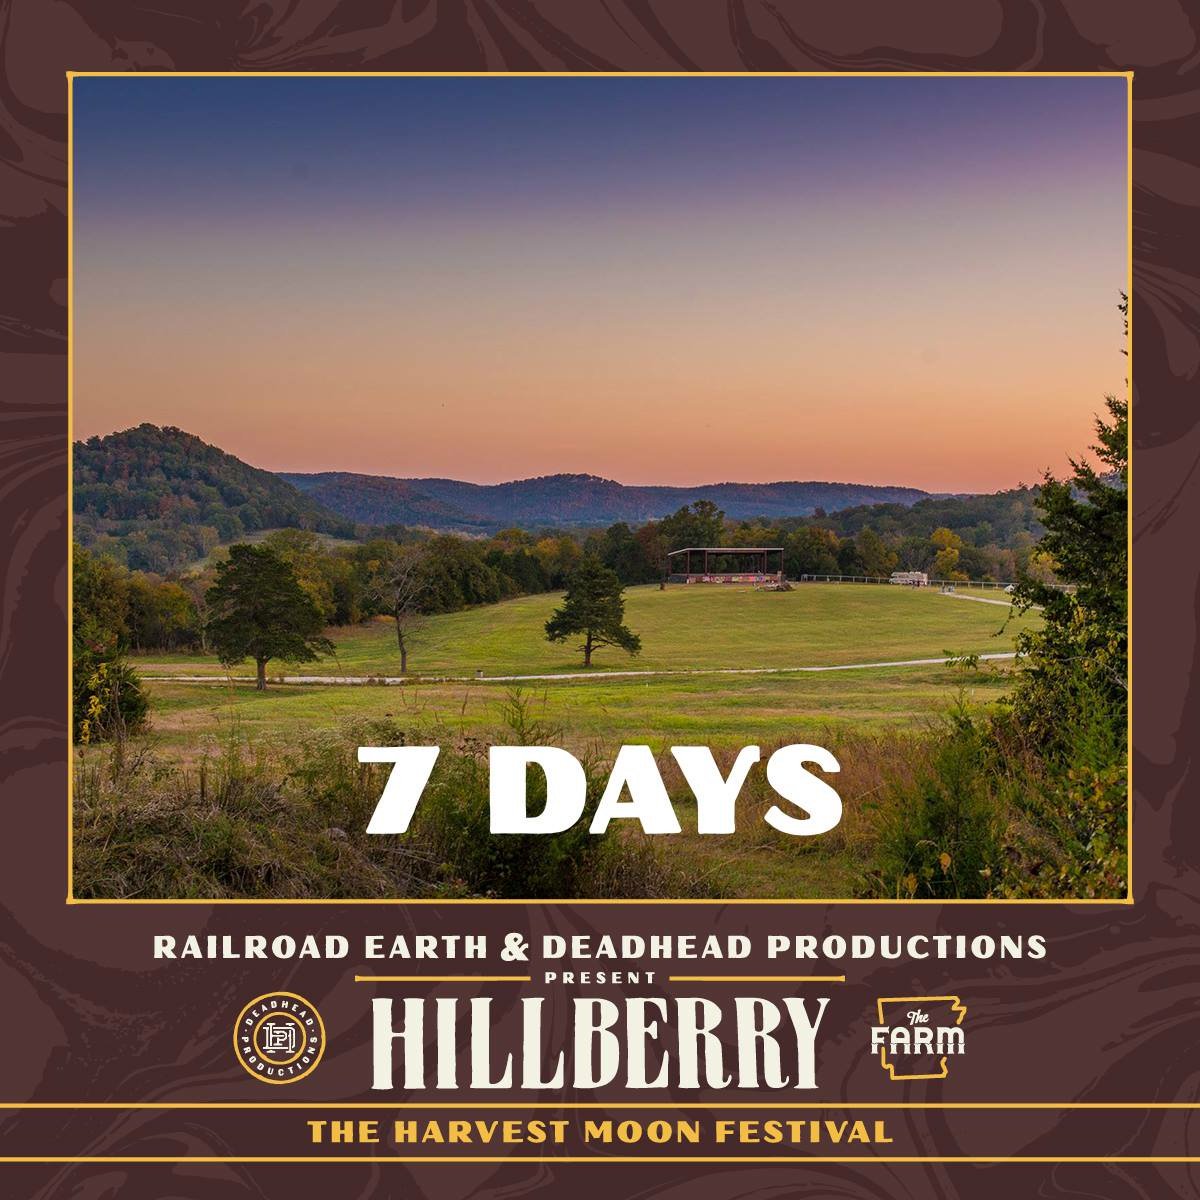 ONE WEEK TO GO! #Hillberry2017 is just 7 days away! Get your tickets, pack your bags, and get ready! Photo Credit: @jamieseed